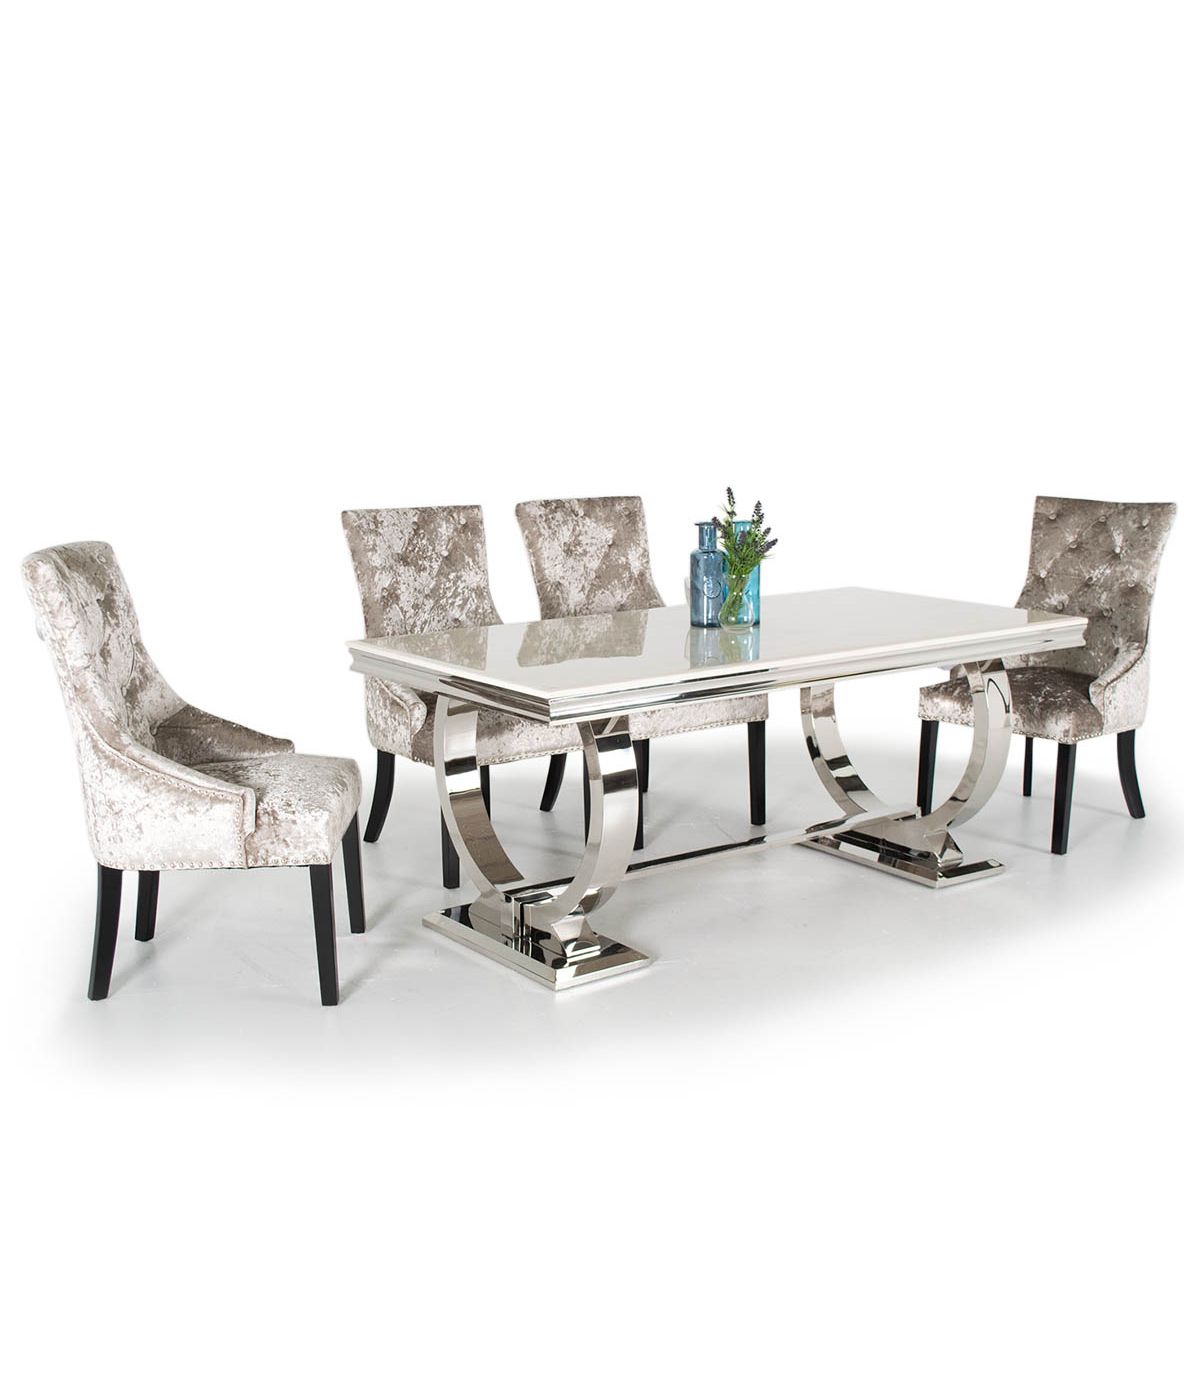 Contemporary 6 Seating Rectangular Dining Tables Throughout Widely Used Venice Marble Dining Table With 6 Chairs (various Colours (View 10 of 25)